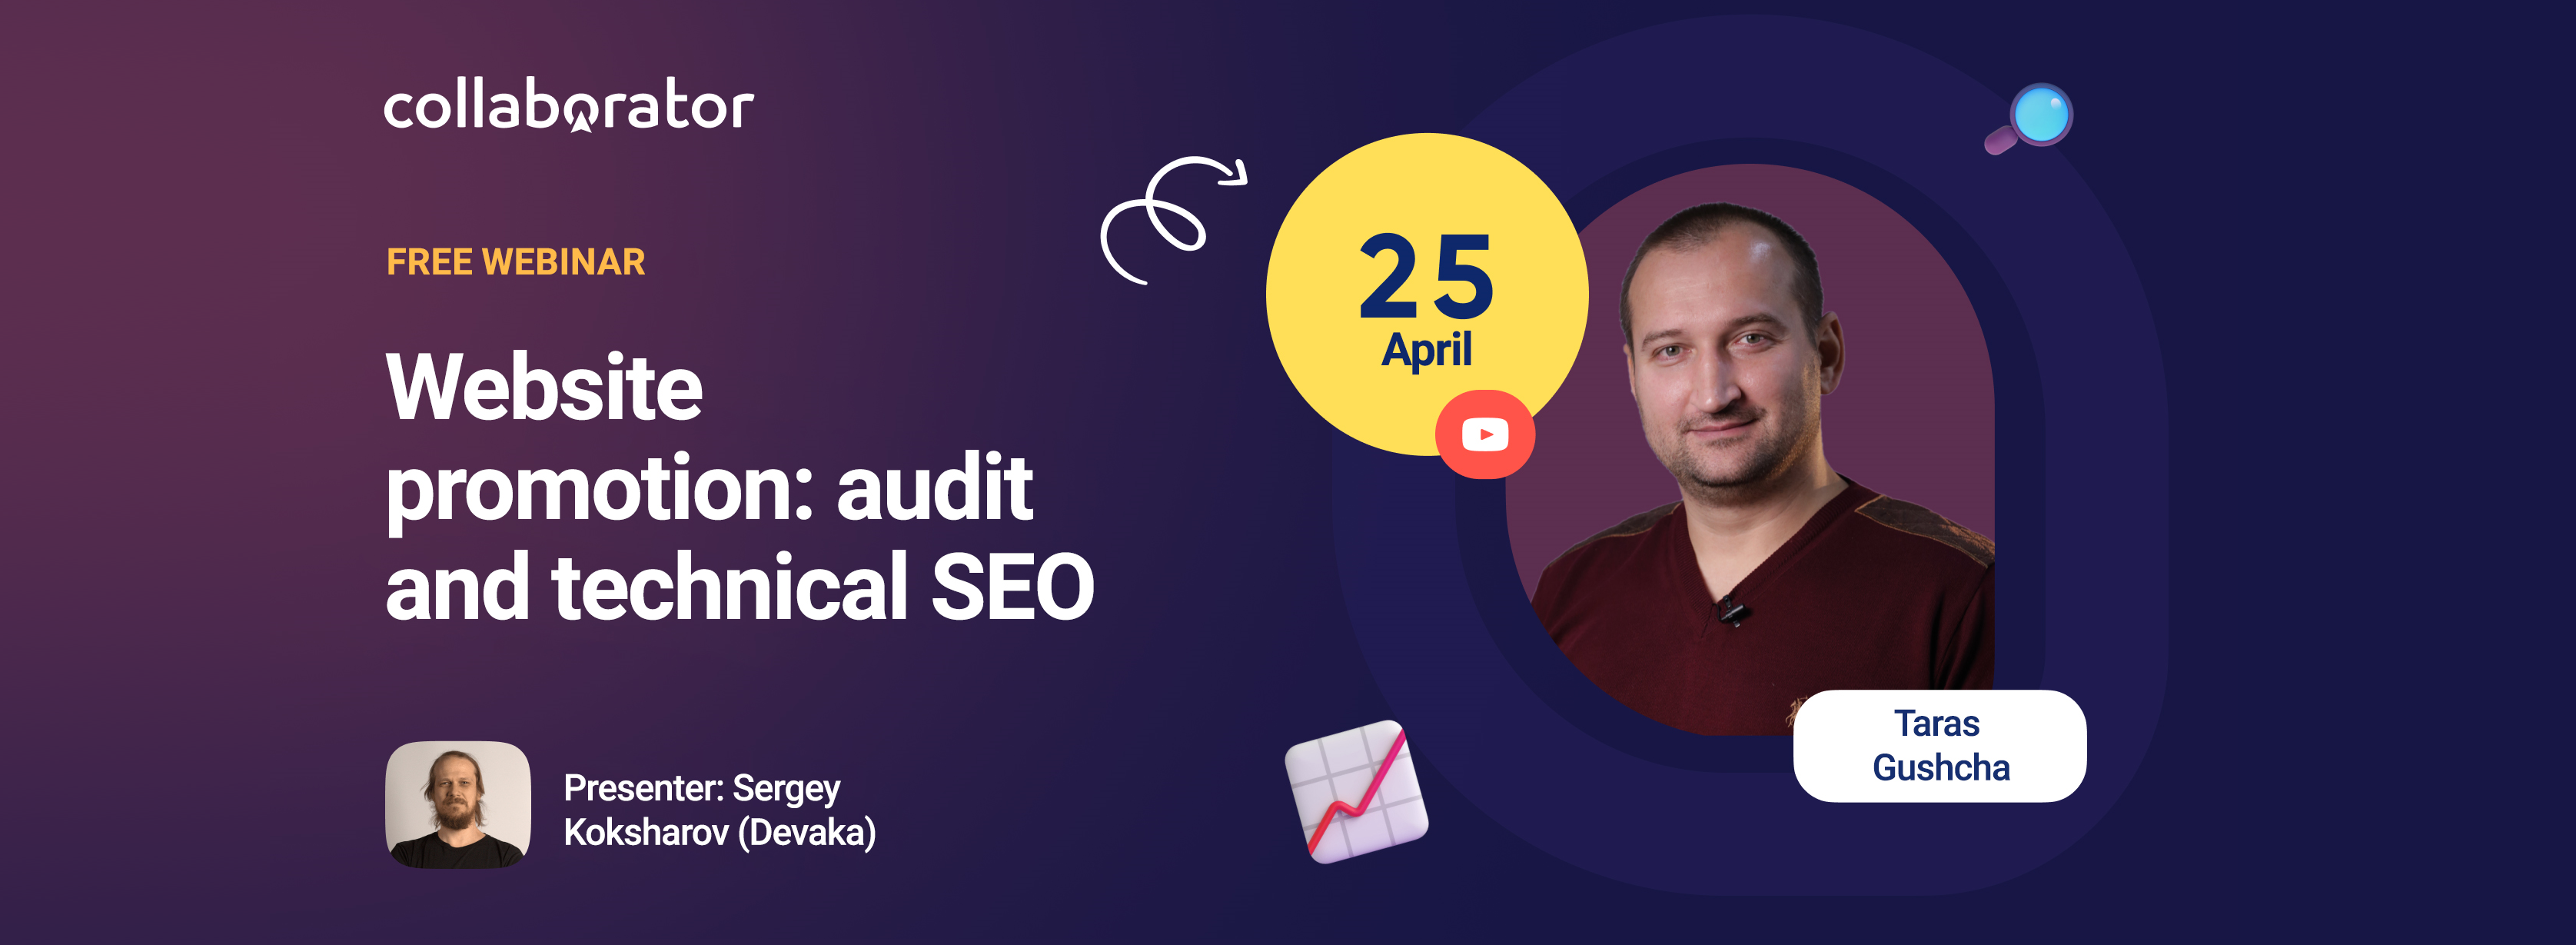 Website promotion: audit and technical SEO